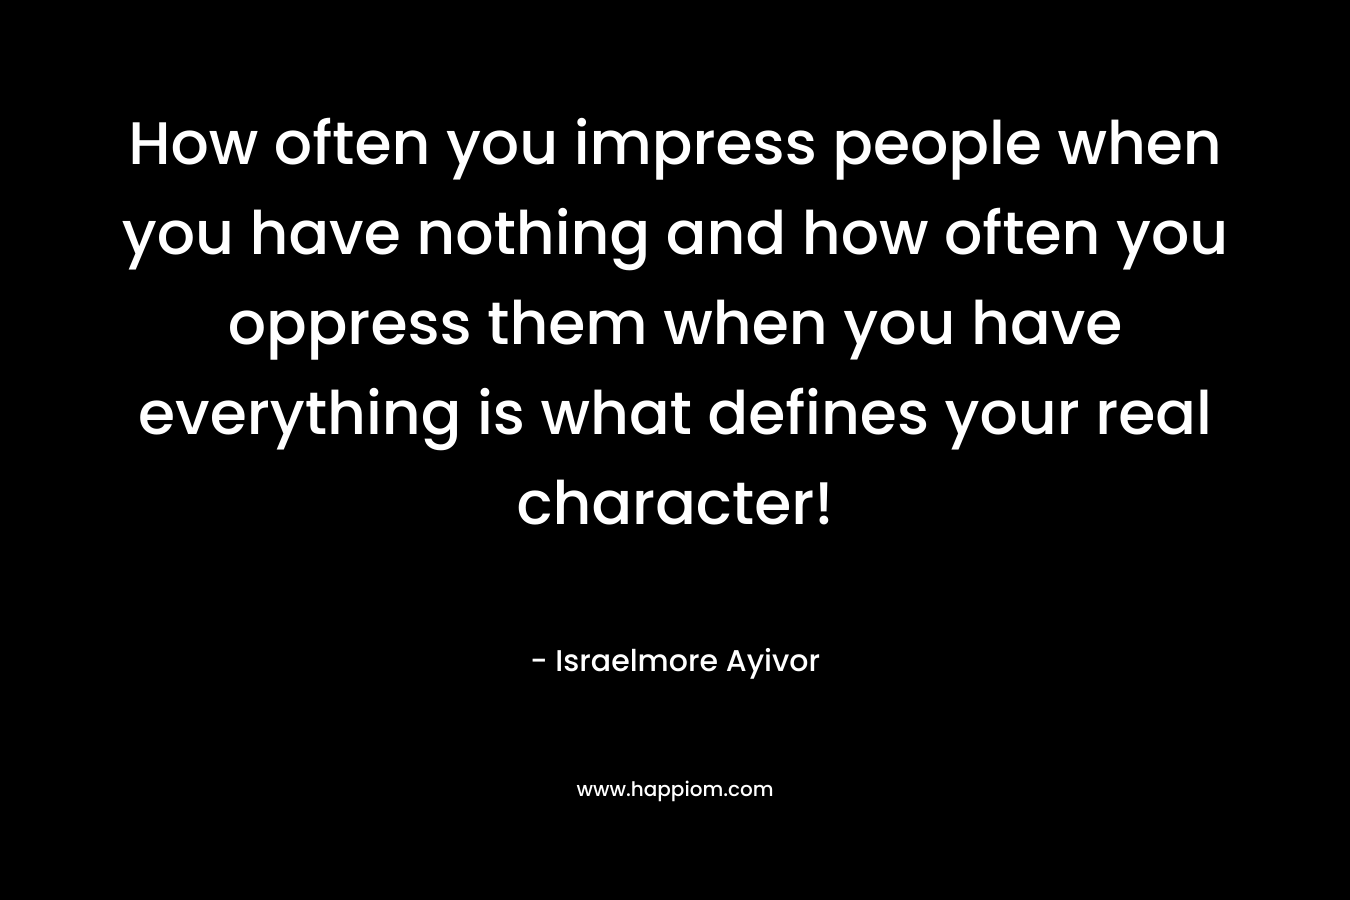 How often you impress people when you have nothing and how often you oppress them when you have everything is what defines your real character!